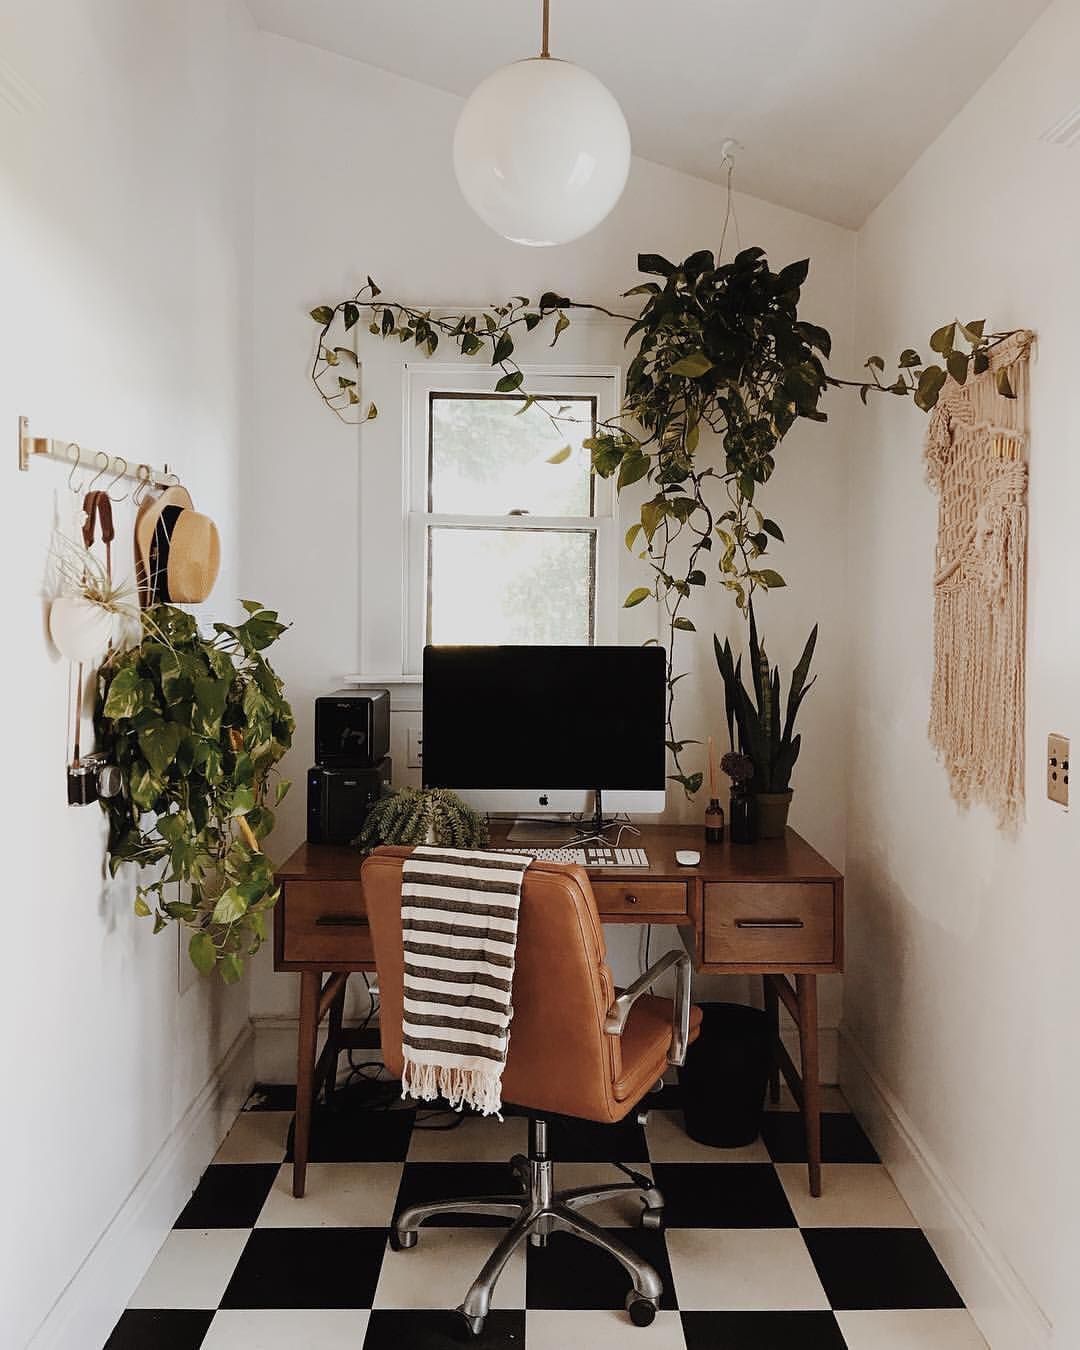 348 Likes, 5 Comments – Capra Designs (@capradesigns) on Instagram: “Workspace inspo! Did you know there are health benefits to